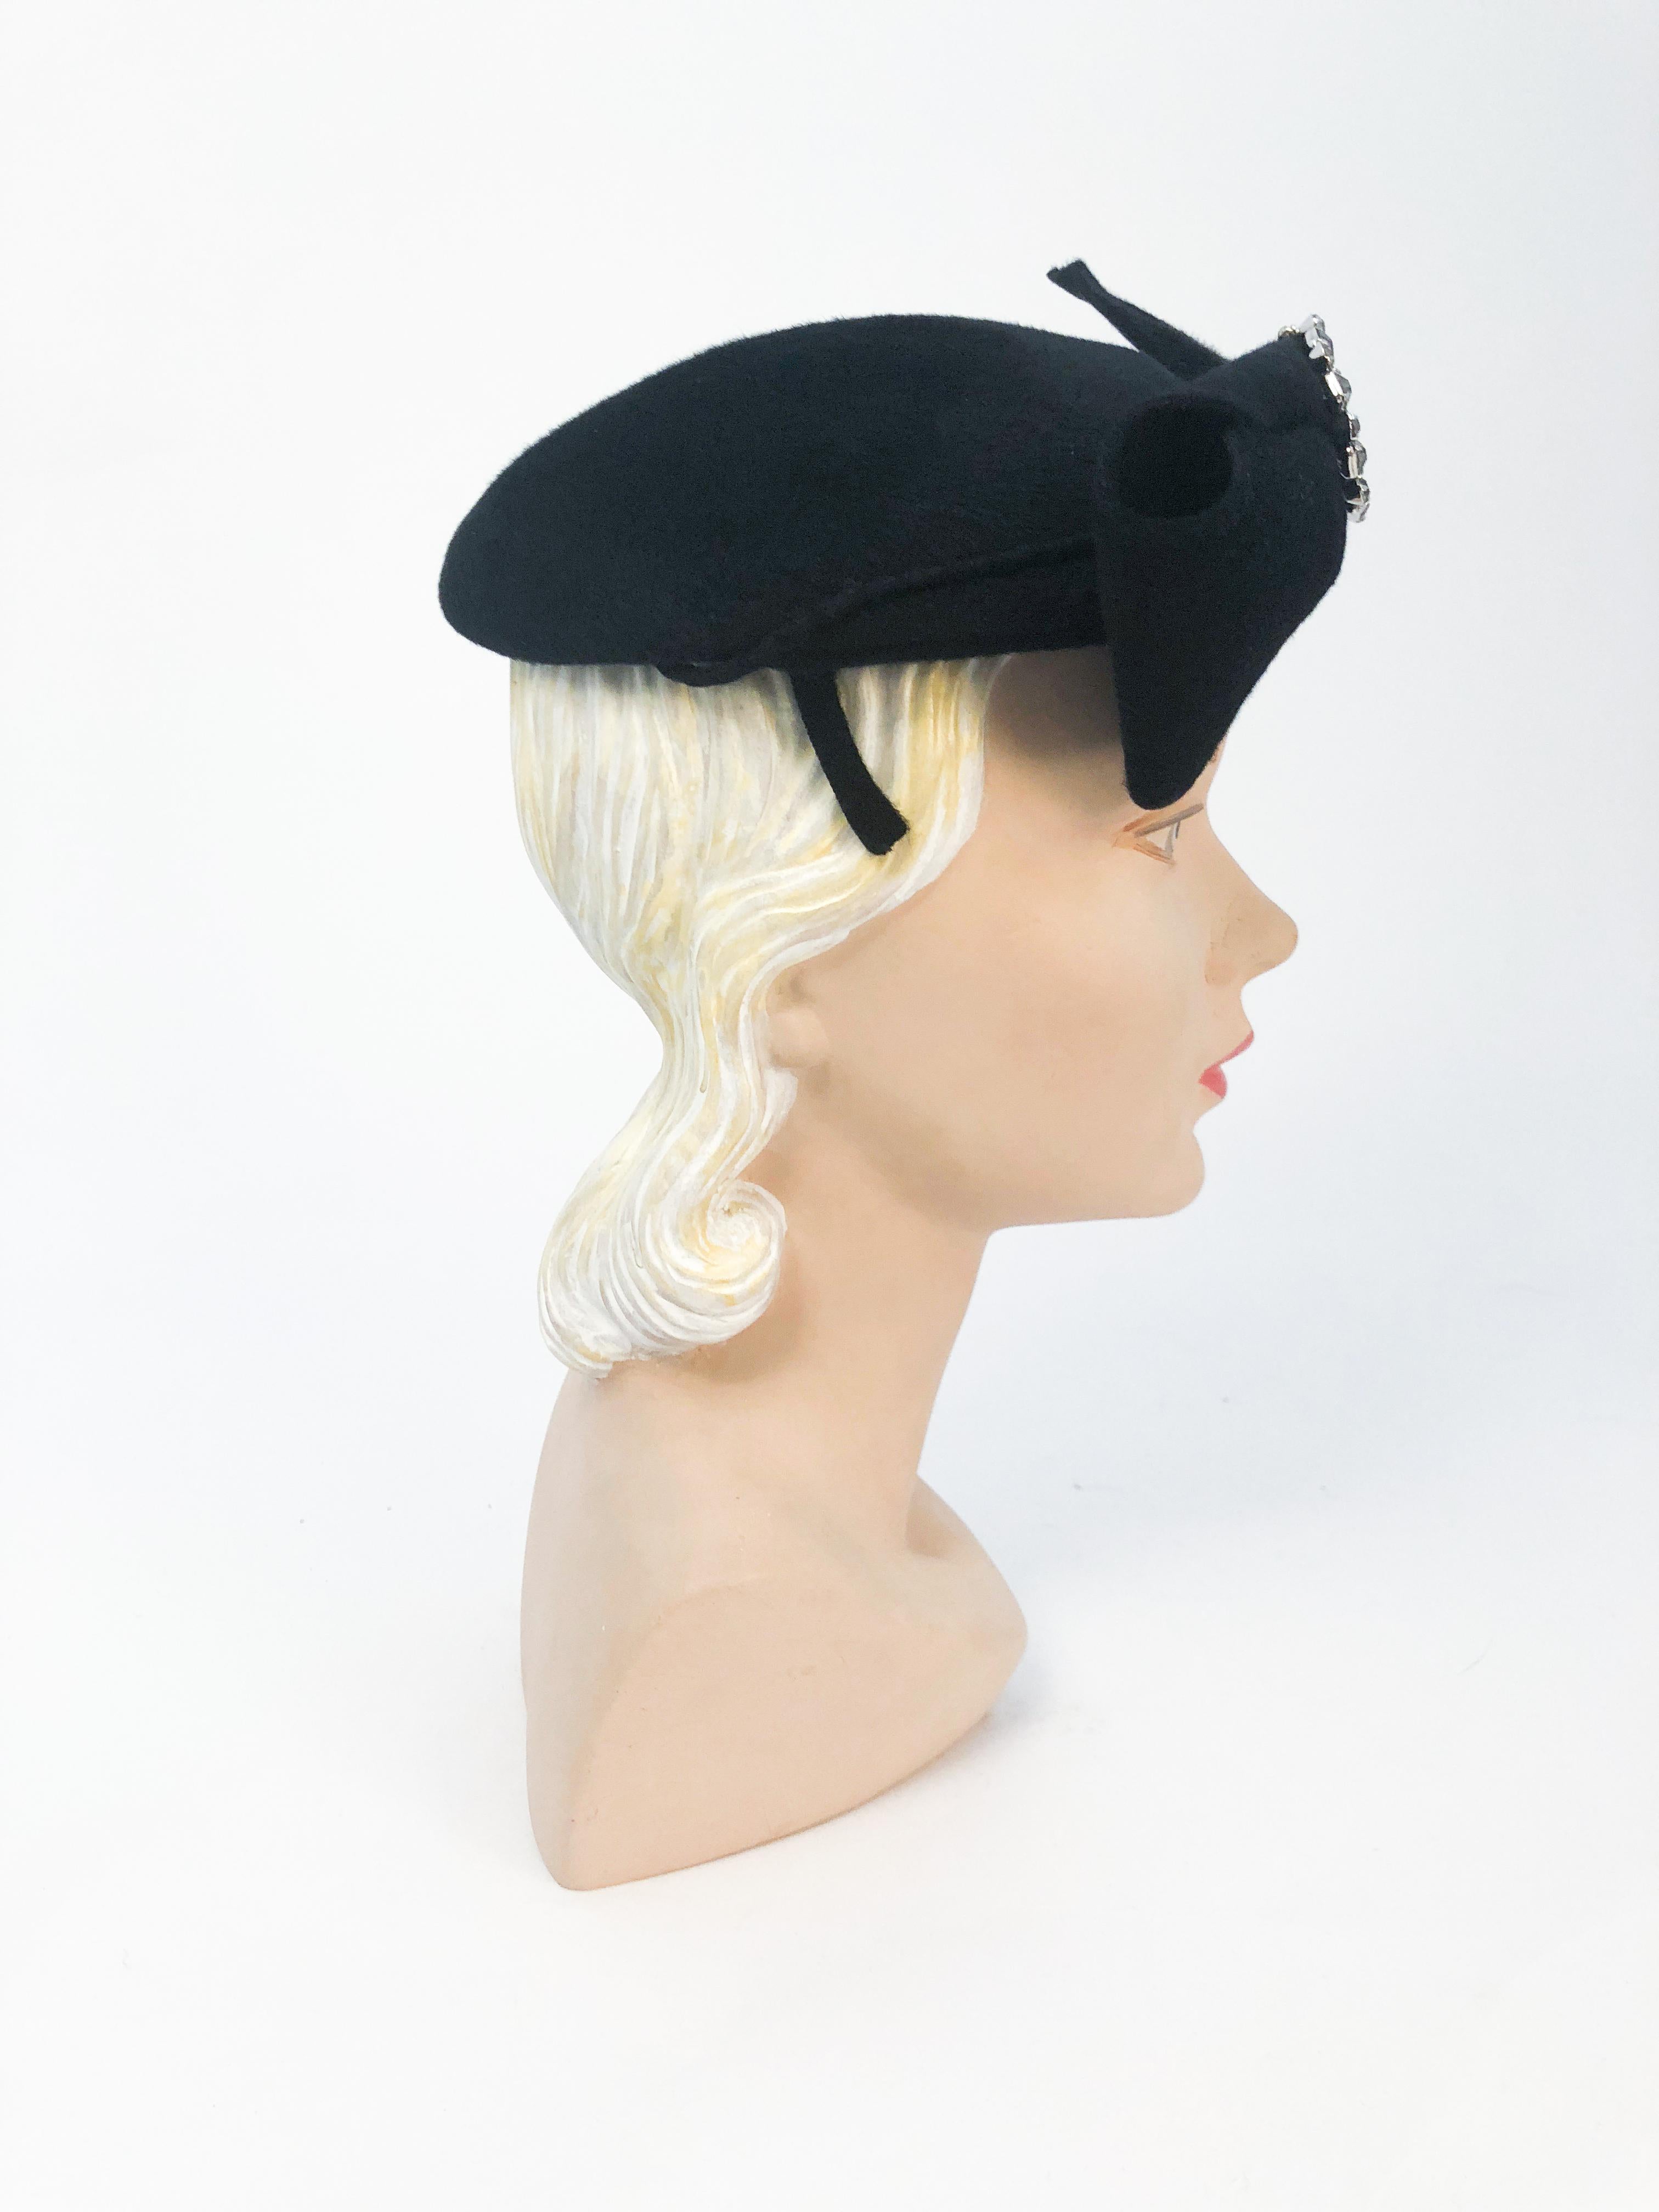 Women's 1950s Black Fur Felt Cocktail Hat with Oversized Bow and Rhinestone Accent